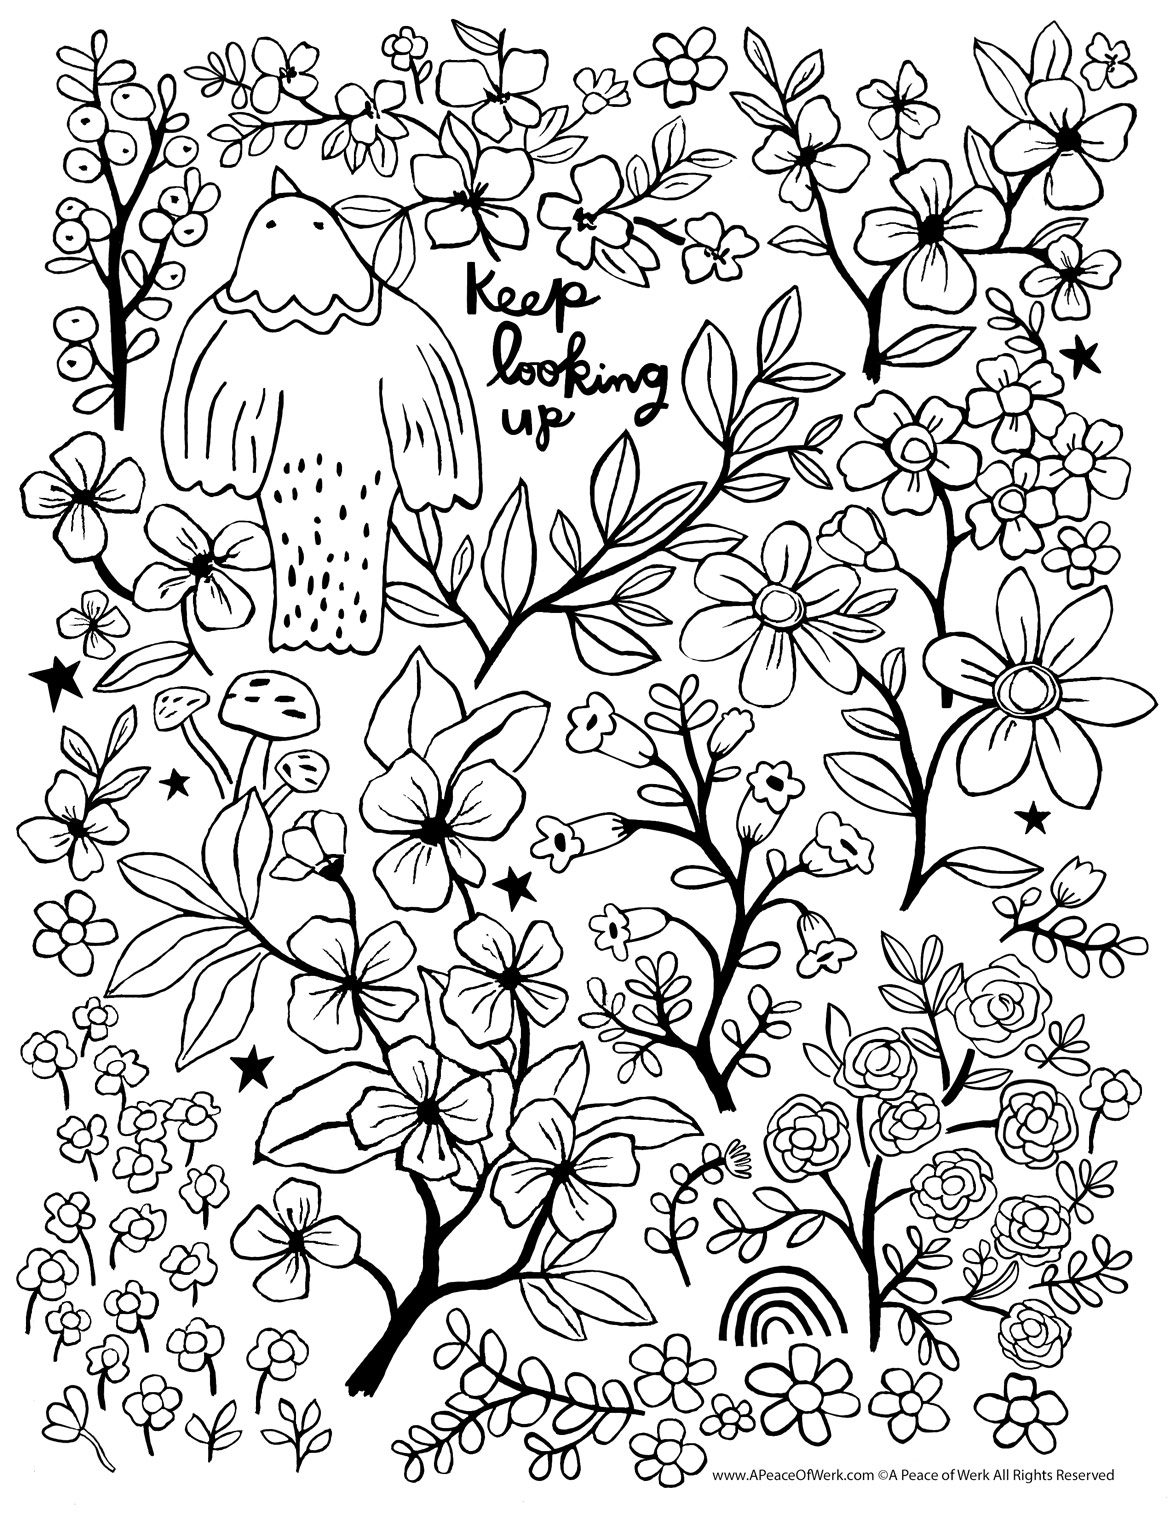 Keep-Looking-Up-Free-Adult-Coloring-Page